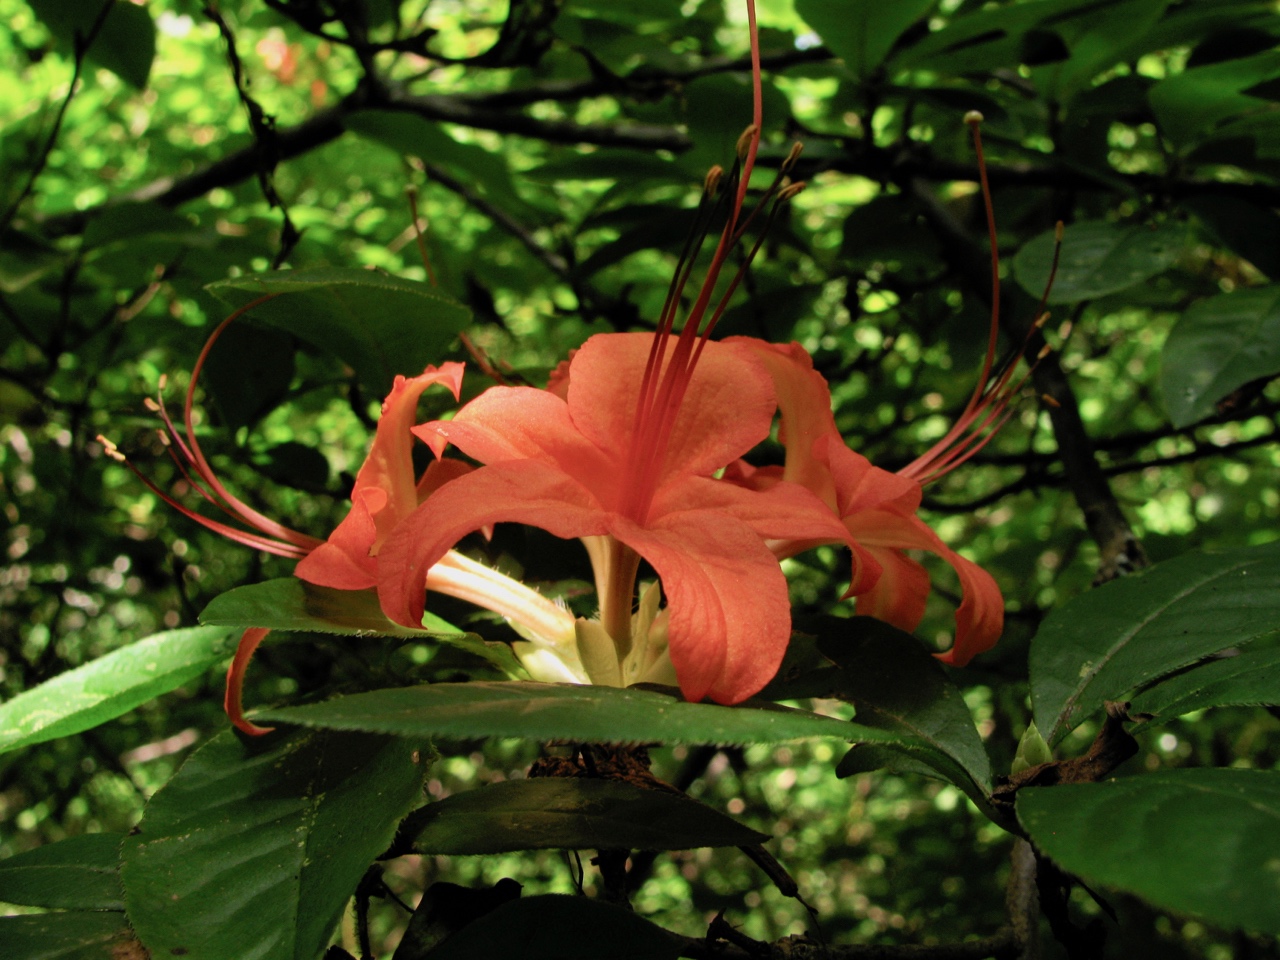 The Scientific Name is Rhododendron cumberlandense. You will likely hear them called Cumberland Azalea. This picture shows the Flowering in July of Rhododendron cumberlandense